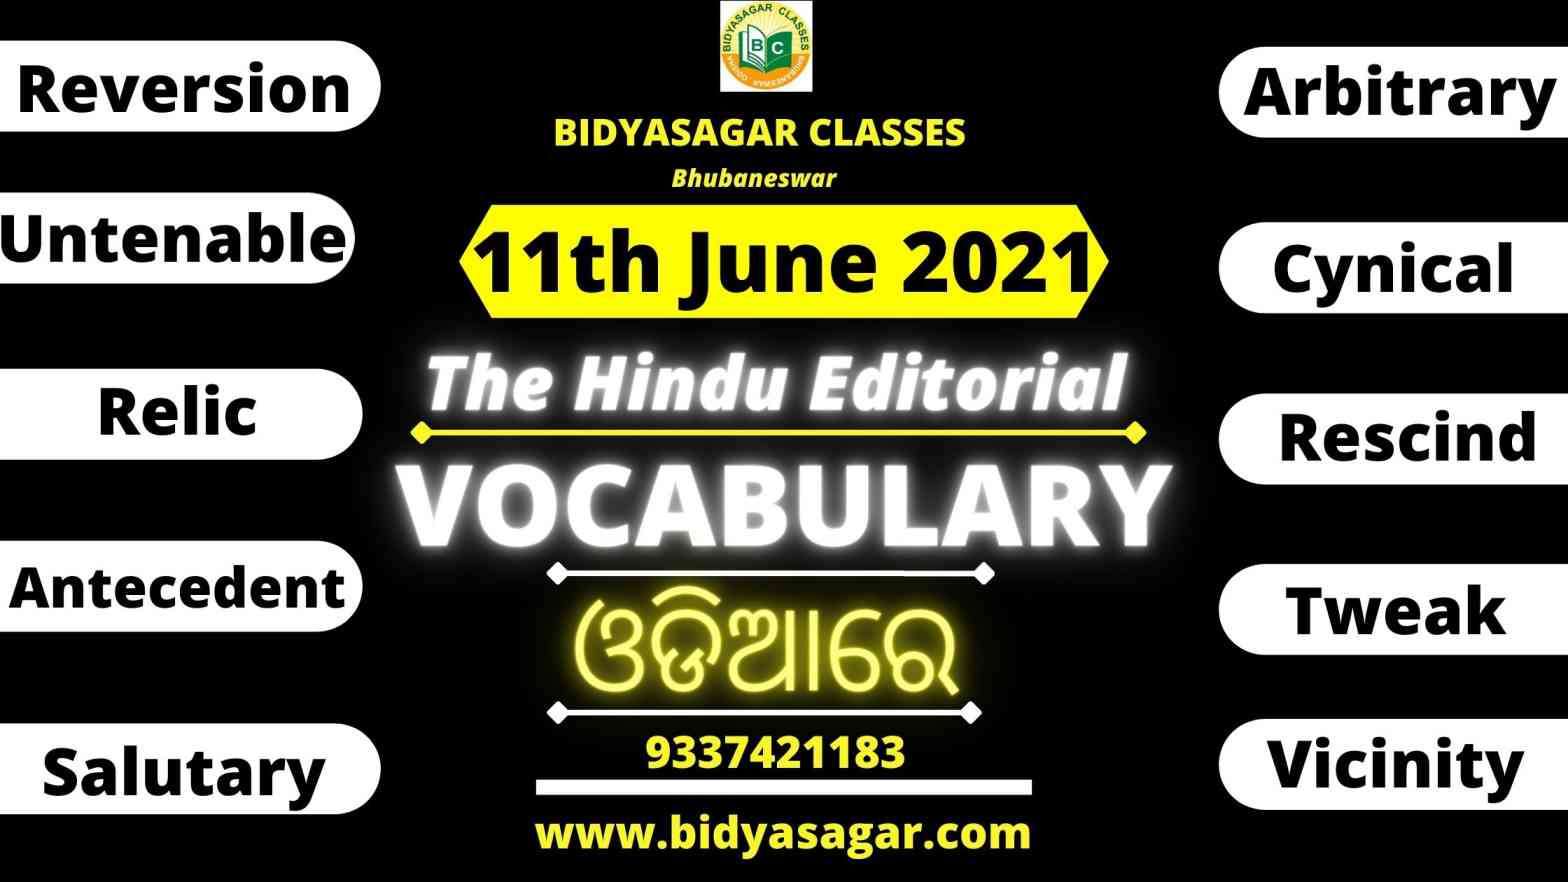 The Hindu Editorial Vocabulary of 11th June 2021